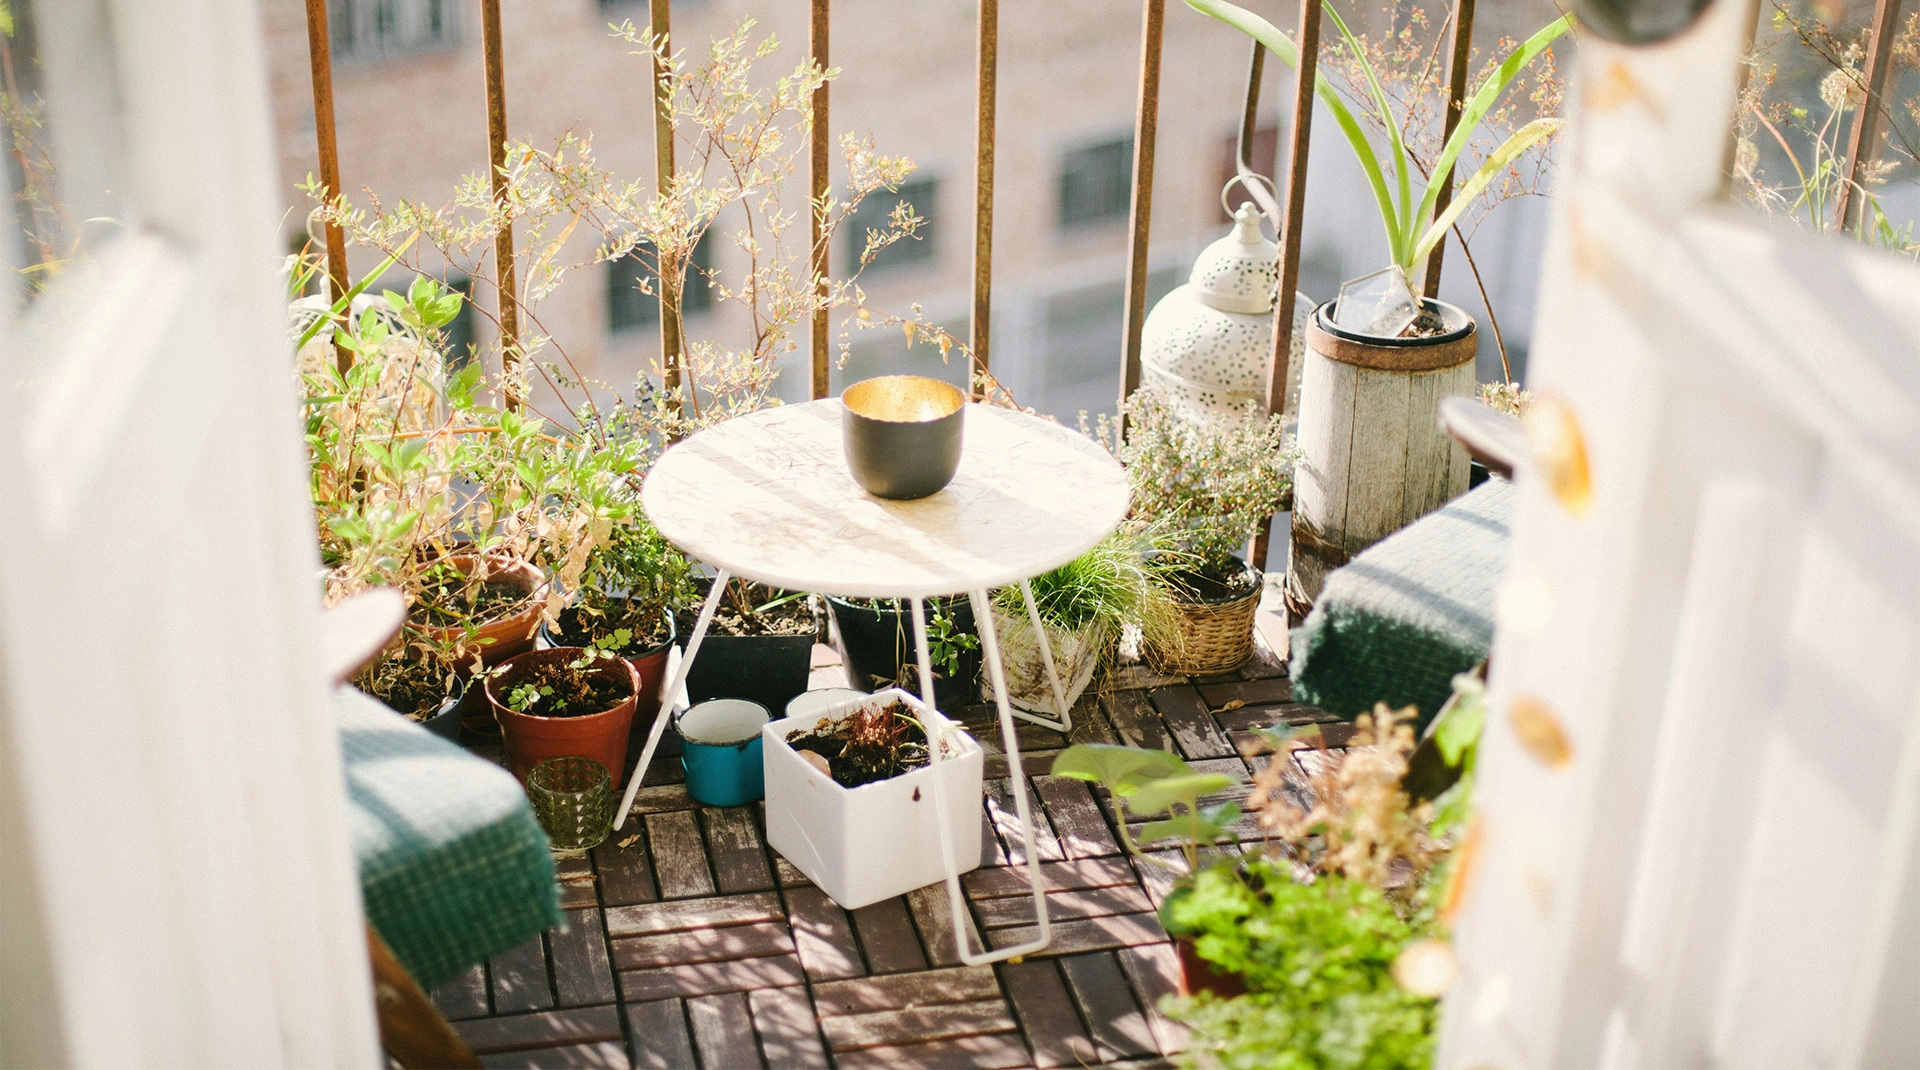 Common Types of City Balcony Garden Products